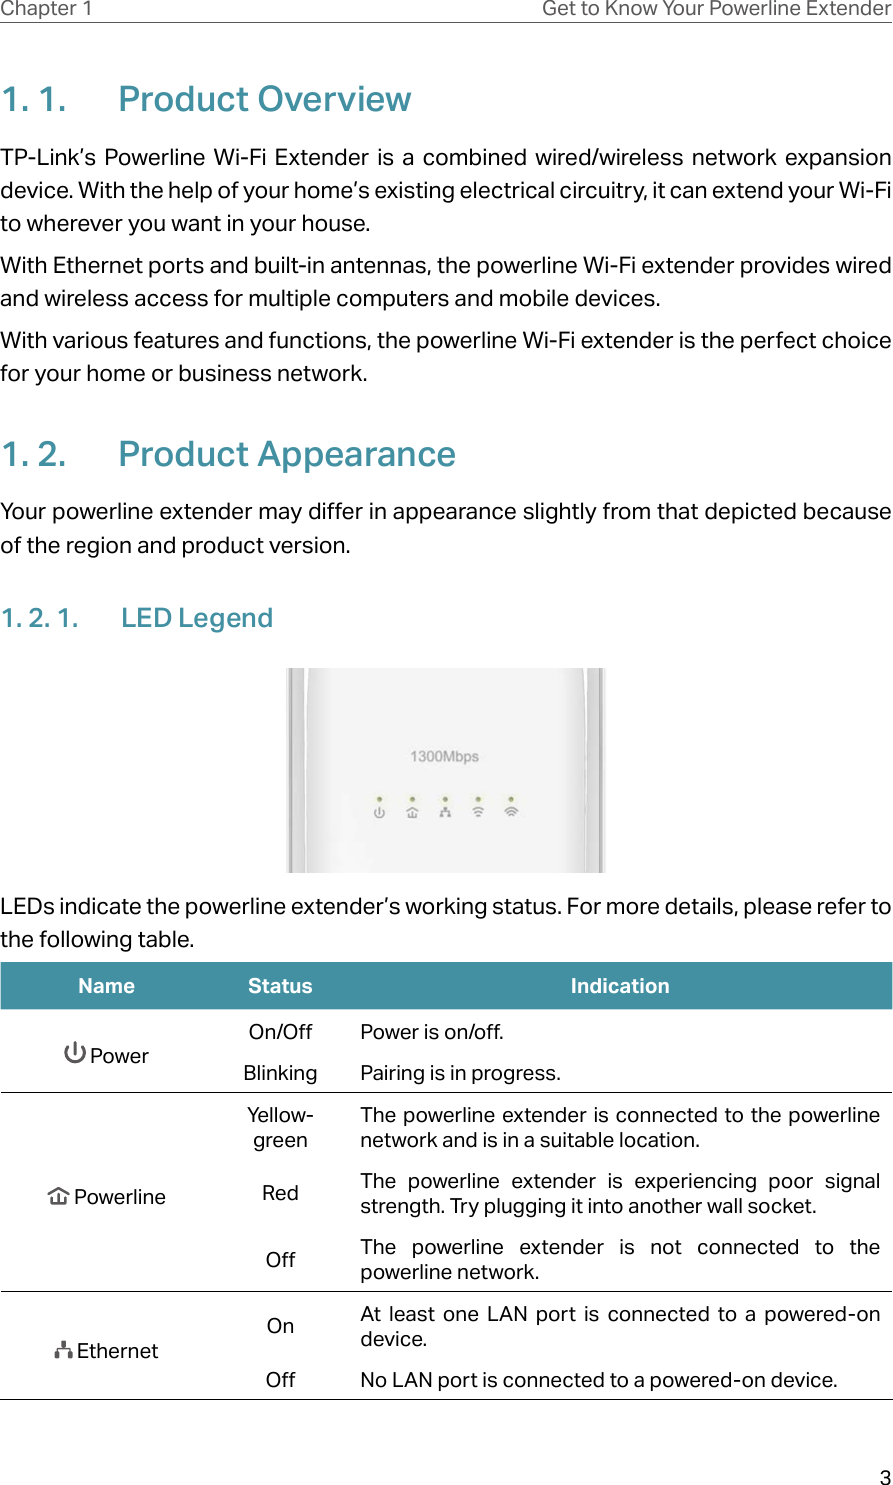 3Chapter 1 Get to Know Your Powerline Extender1. 1.  Product OverviewTP-Link’s Powerline Wi-Fi Extender is a combined wired/wireless network expansion device. With the help of your home’s existing electrical circuitry, it can extend your Wi-Fi to wherever you want in your house. With Ethernet ports and built-in antennas, the powerline Wi-Fi extender provides wired and wireless access for multiple computers and mobile devices.With various features and functions, the powerline Wi-Fi extender is the perfect choice for your home or business network.1. 2.  Product AppearanceYour powerline extender may differ in appearance slightly from that depicted because of the region and product version.1. 2. 1.  LED LegendLEDs indicate the powerline extender’s working status. For more details, please refer to the following table.Name Status Indication PowerOn/Off Power is on/off.Blinking Pairing is in progress. PowerlineYellow-greenThe powerline extender is connected to the powerline network and is in a suitable location.Red The powerline extender is experiencing poor signal strength. Try plugging it into another wall socket.Off The powerline extender is not connected to the powerline network. EthernetOn At least one LAN port is connected to a powered-on device.Off No LAN port is connected to a powered-on device.